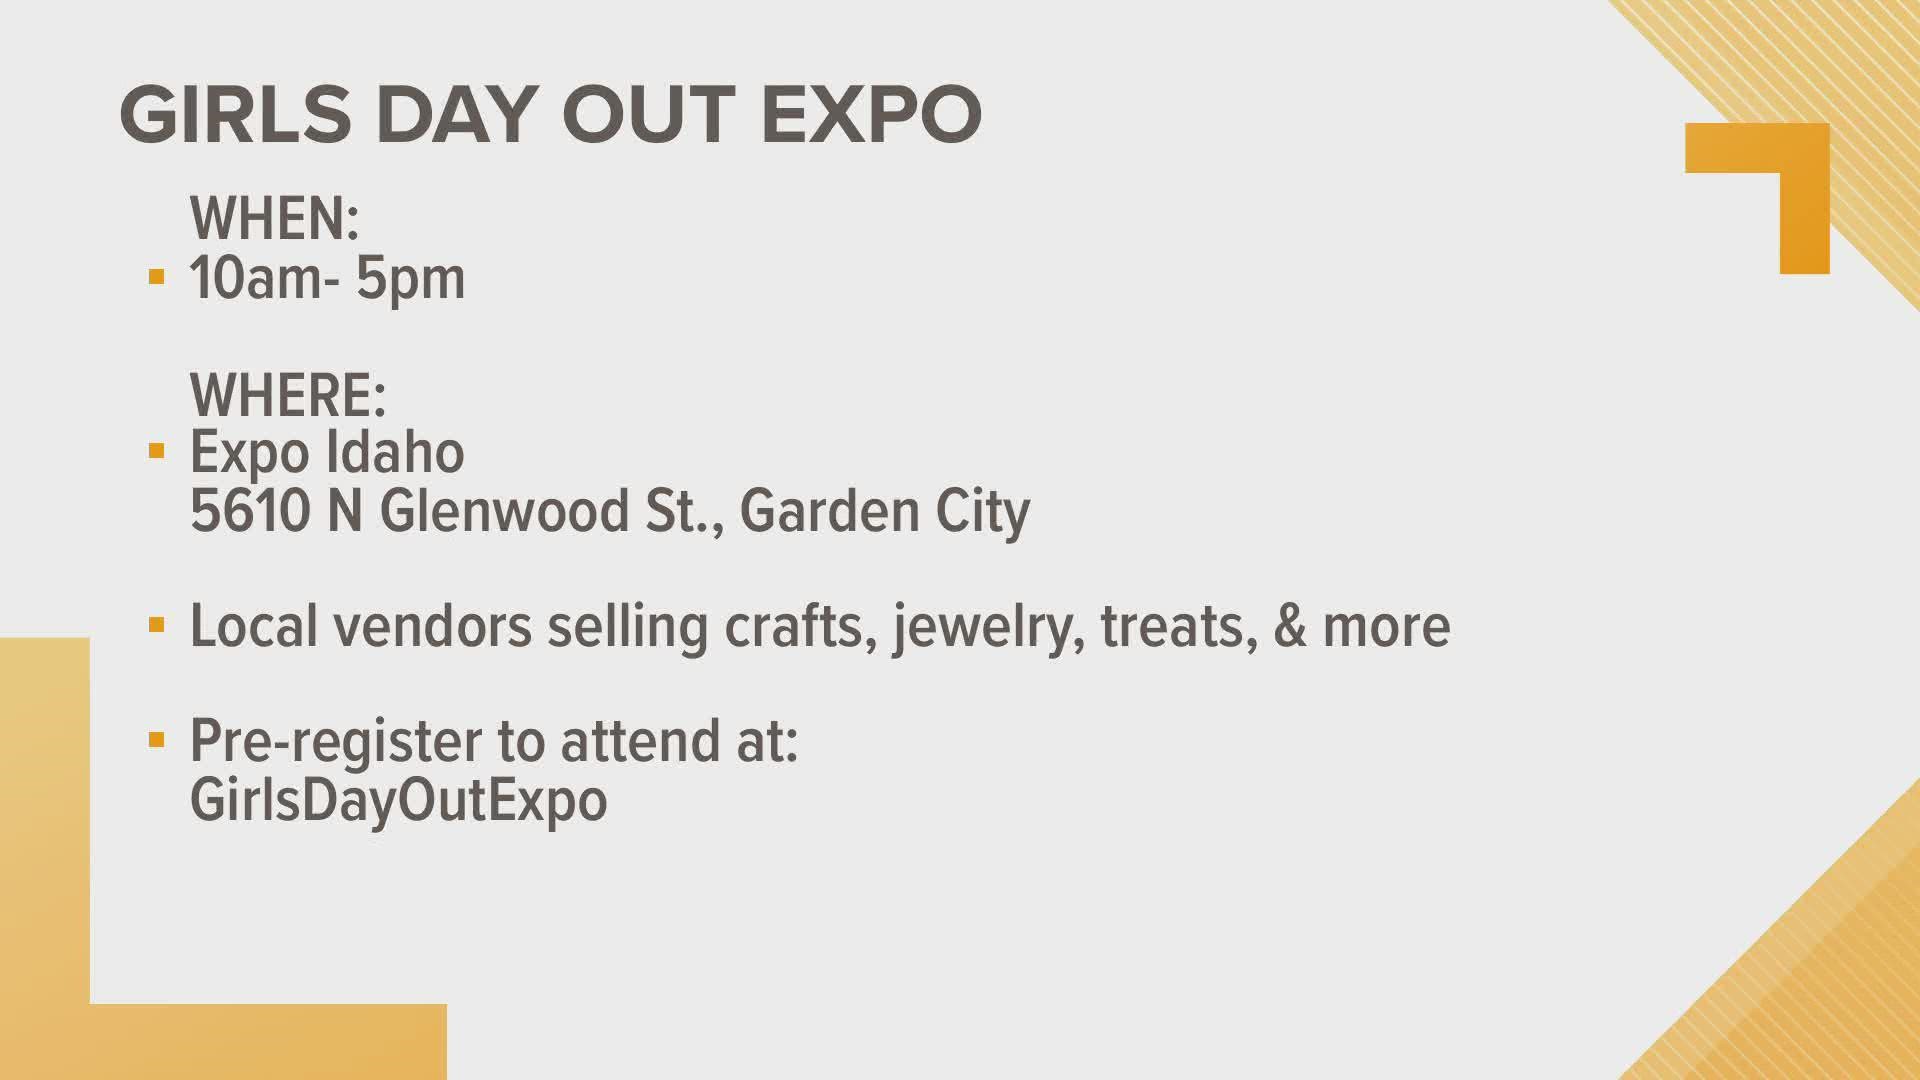 Admission is free for the event, which features over 100 local vendors, and runs from 10 a.m. to 5 p.m. at Expo Idaho.